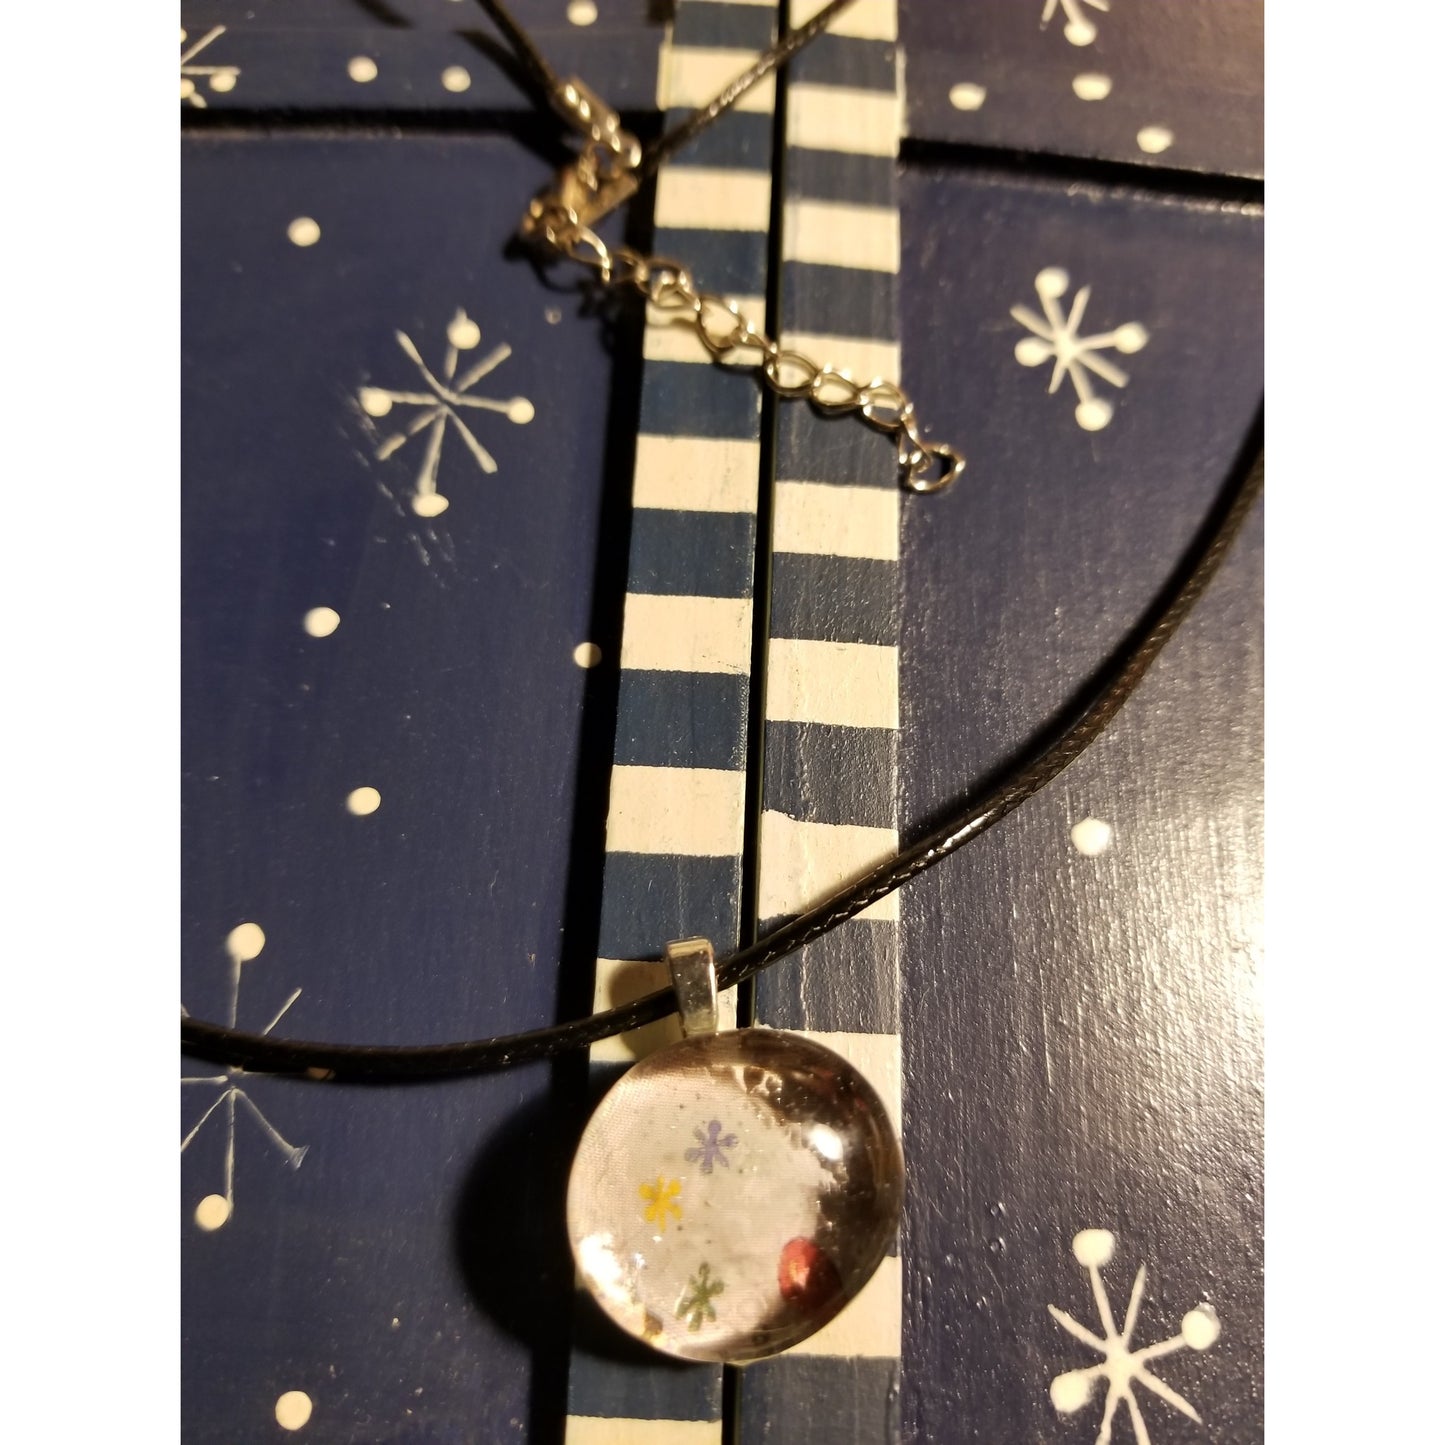 Flowery Collage - Handmade Good Flat Back Glass Marble Necklace 💋